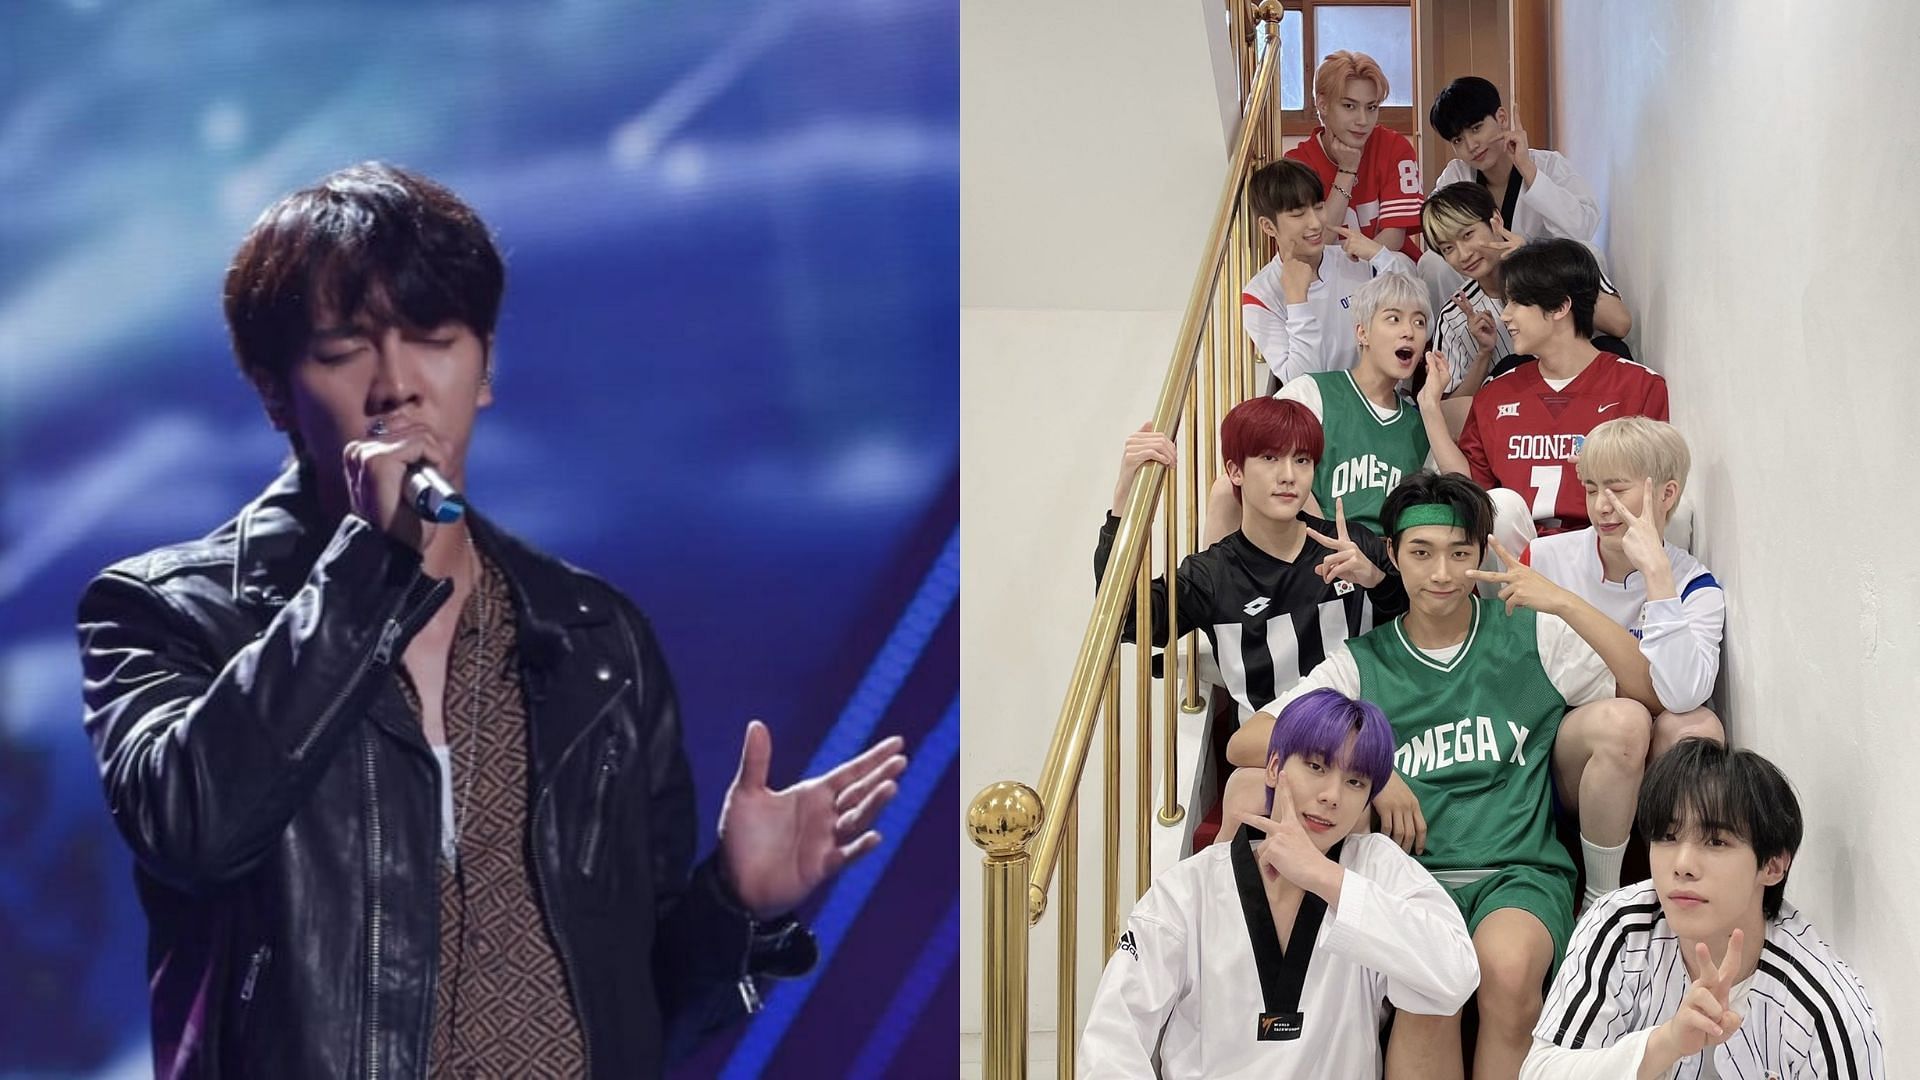 Lee Seung-gi and OMEGA X are two K-pop idols who spoke out about their mistreatment by agencies. (Images via Twitter/ @Spain_Kpop_ and @nflyingrl)